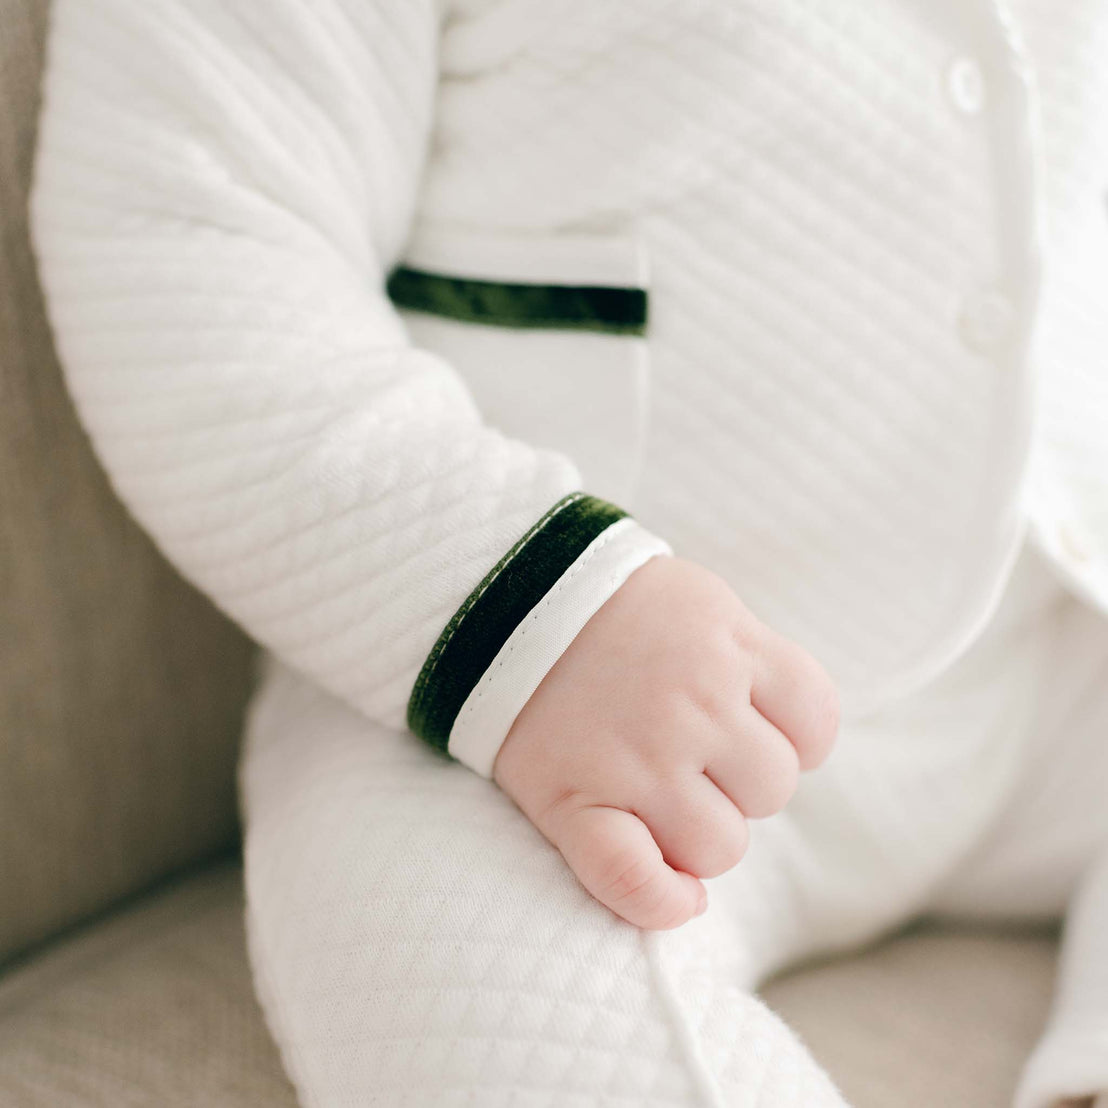 A close-up photo of a baby's fist wearing a Noah 3-Piece Suit with green trim, seated on an upscale, soft light-colored surface.